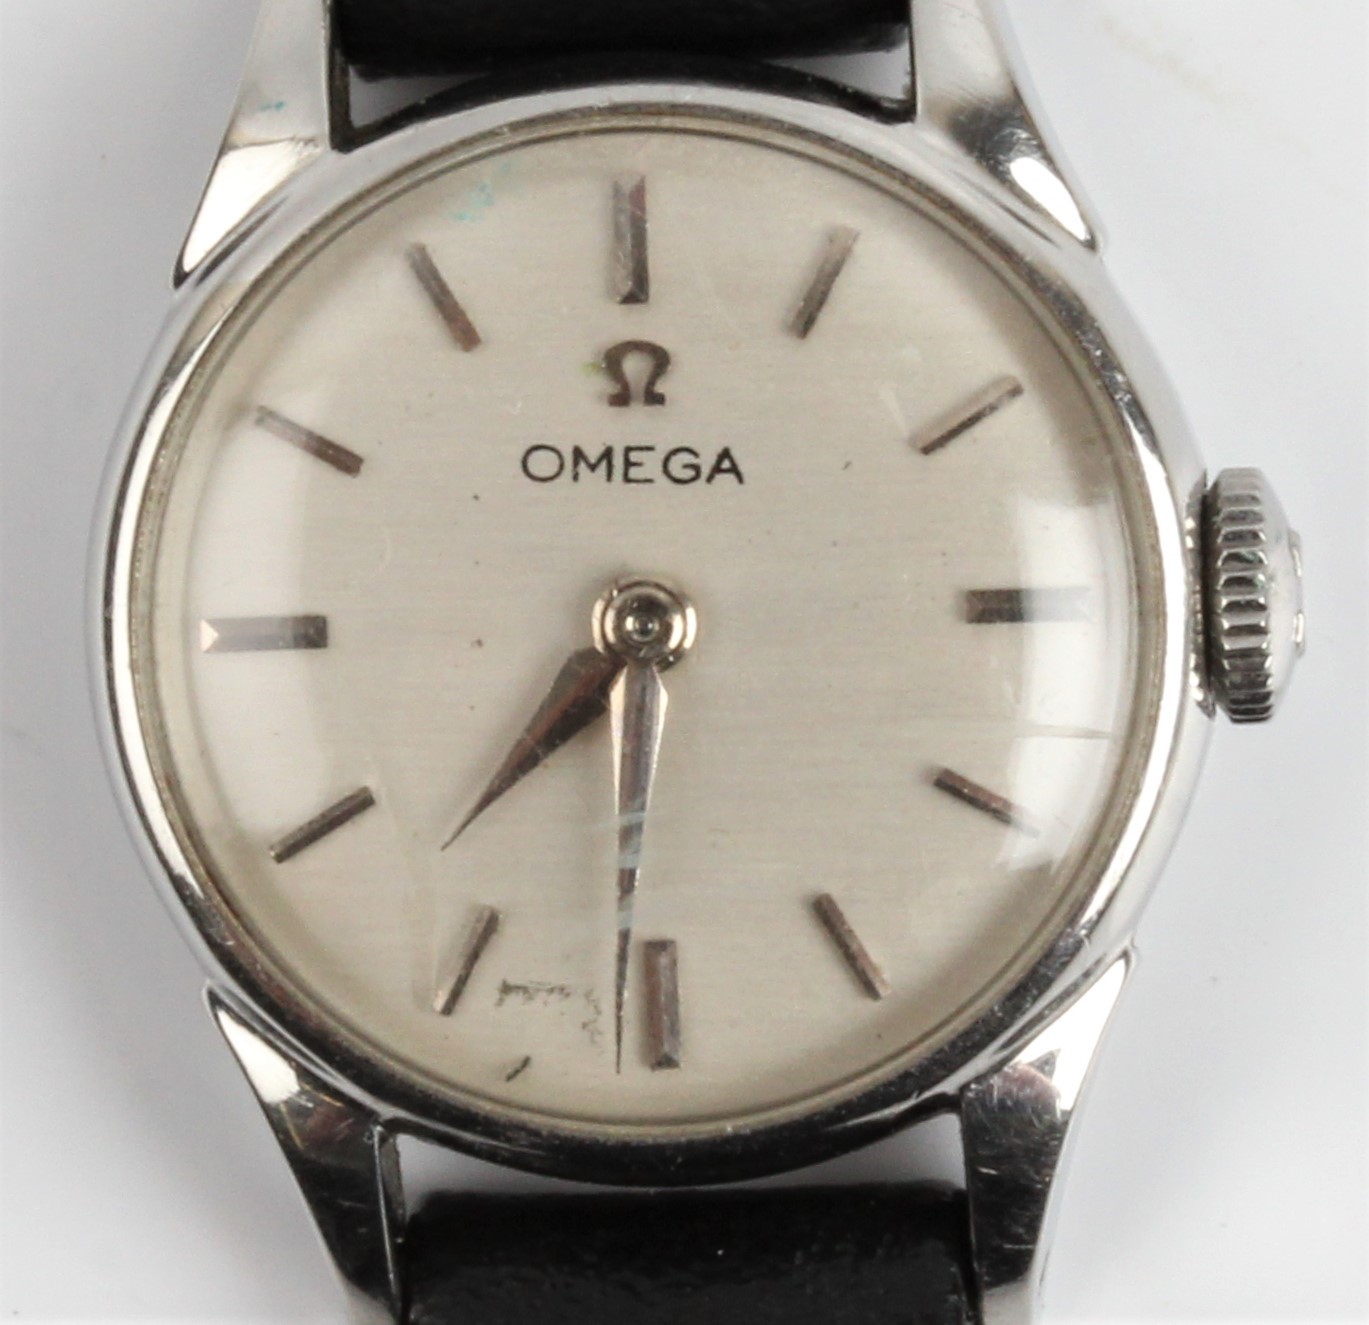 A lady's Omega wristwatch, the silver-tone dial having hourly baton markers, on black leather strap.